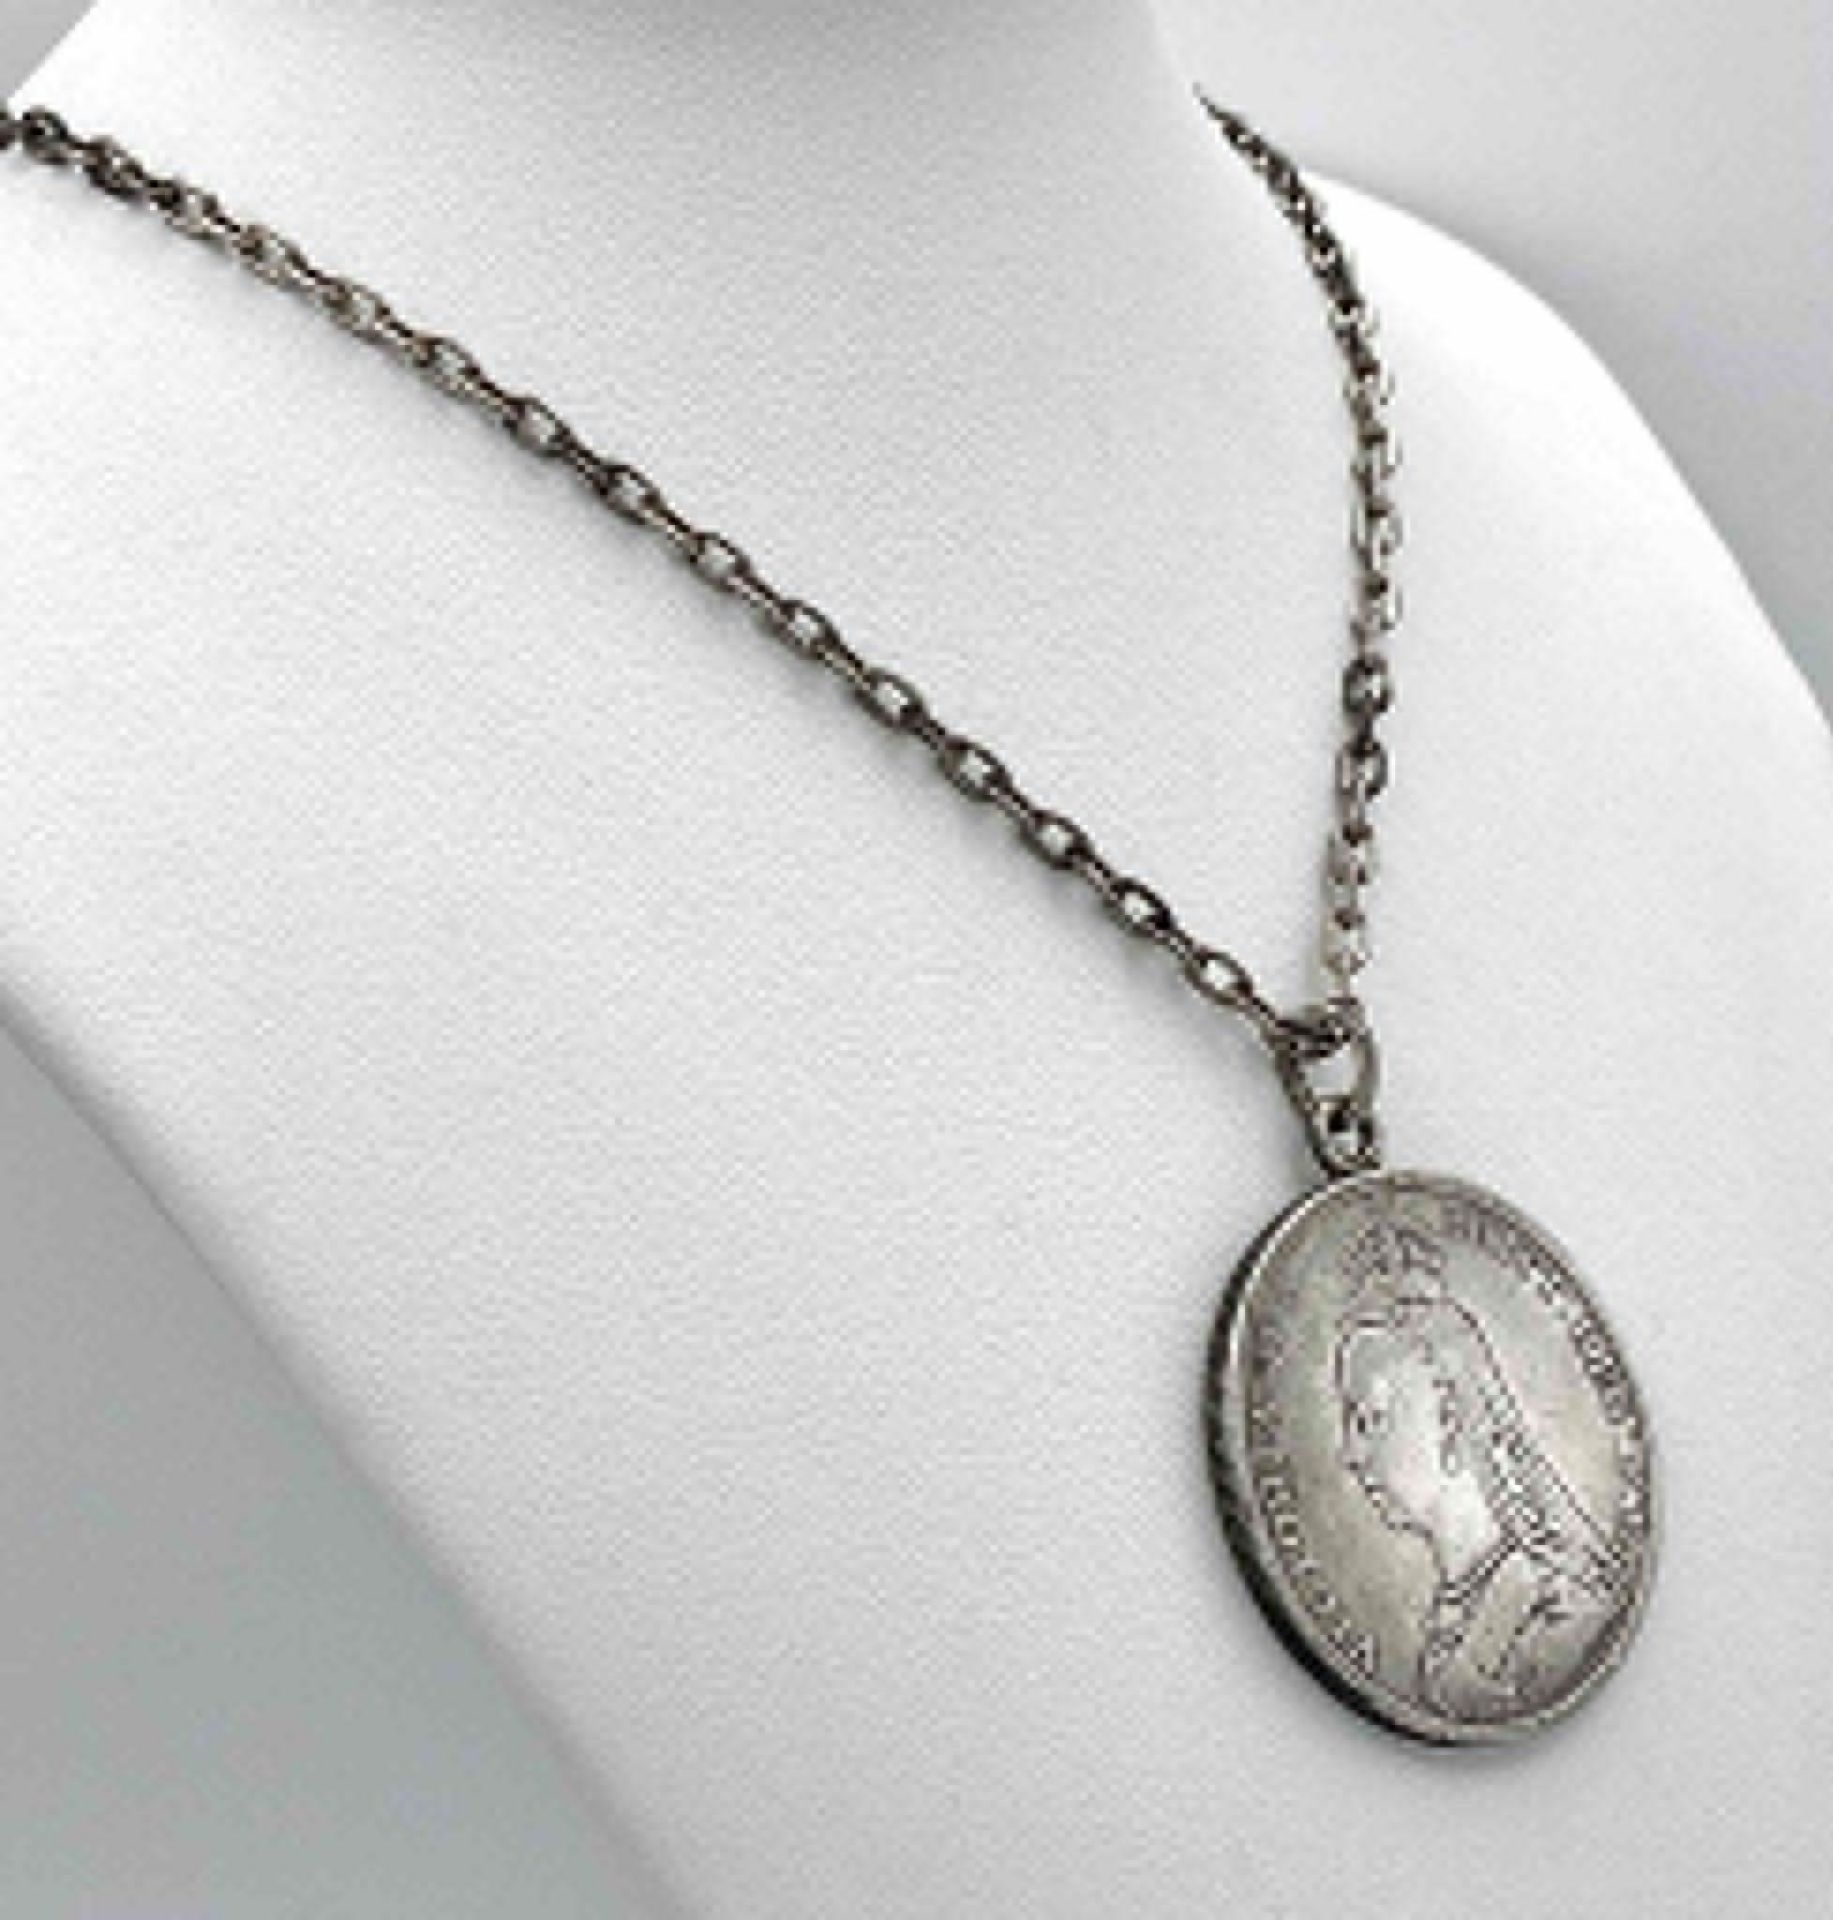 An 1891 Queen Victoria Silver Crown in a Pendant Setting on a Sterling Silver Chain. 41.21g total - Bild 3 aus 6